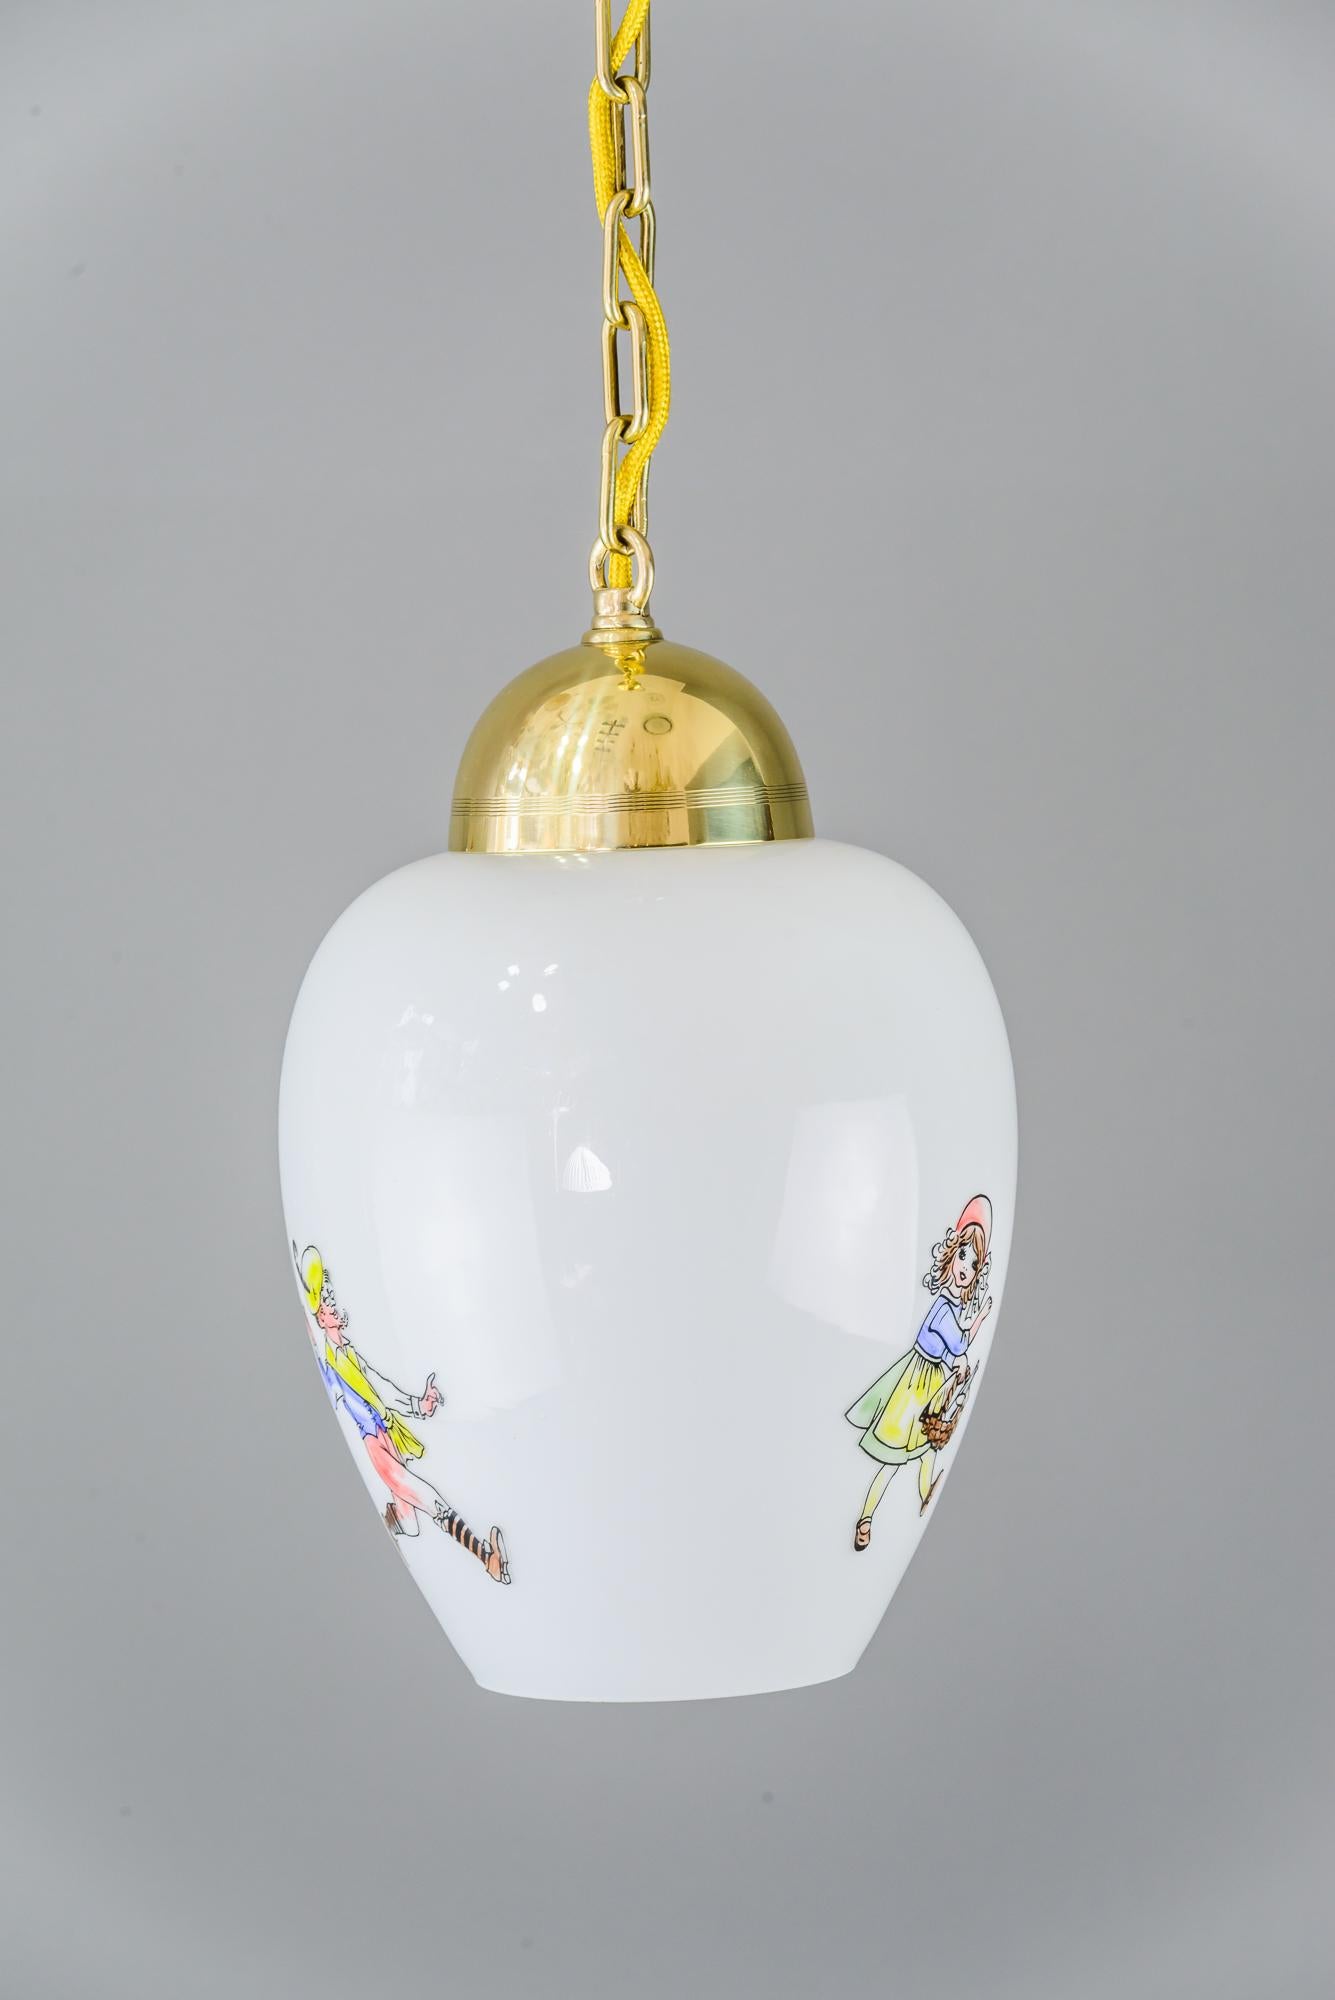 Art Deco pendant, circa 1930s
Polished and stove enamelled
Painted glass shade
3 different motives on the glass.